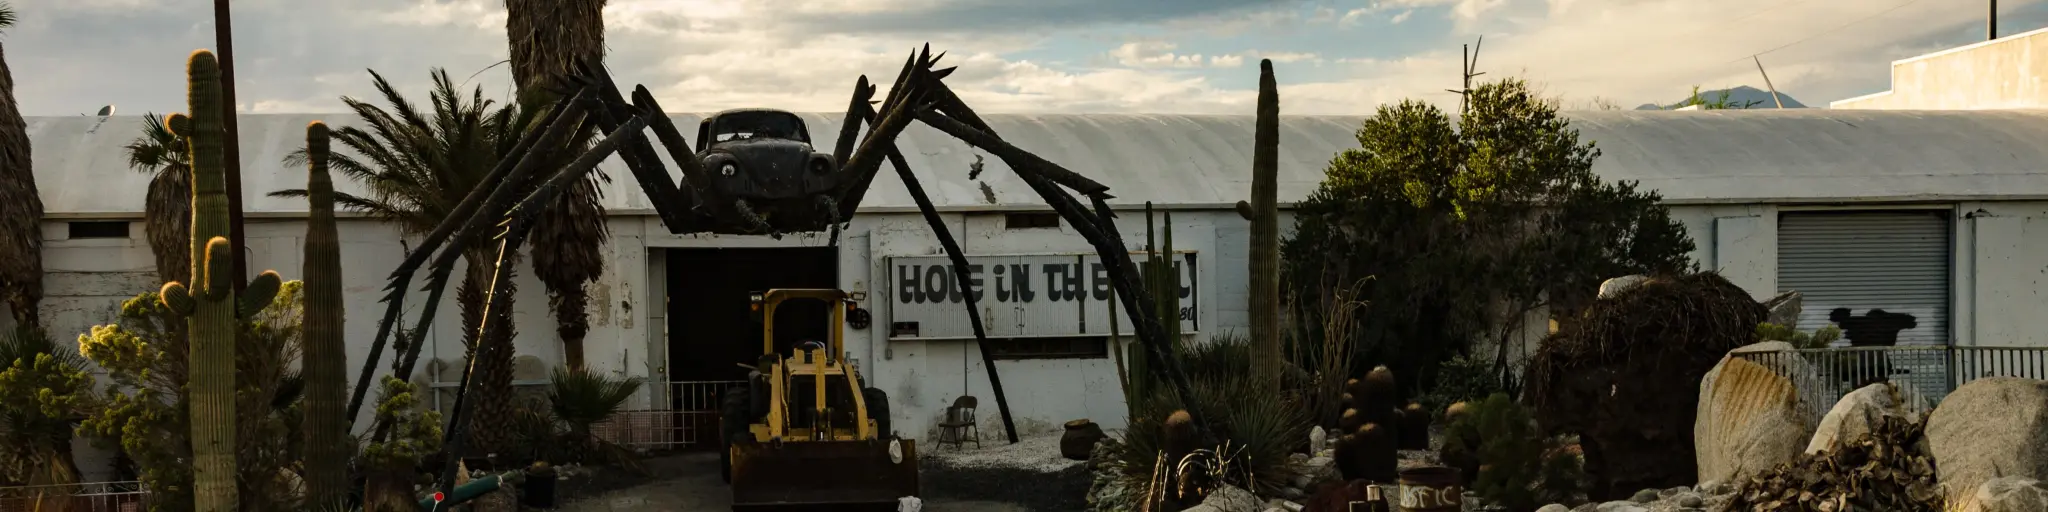 Roadside spider sculpture crafted from a VW in Palm Springs